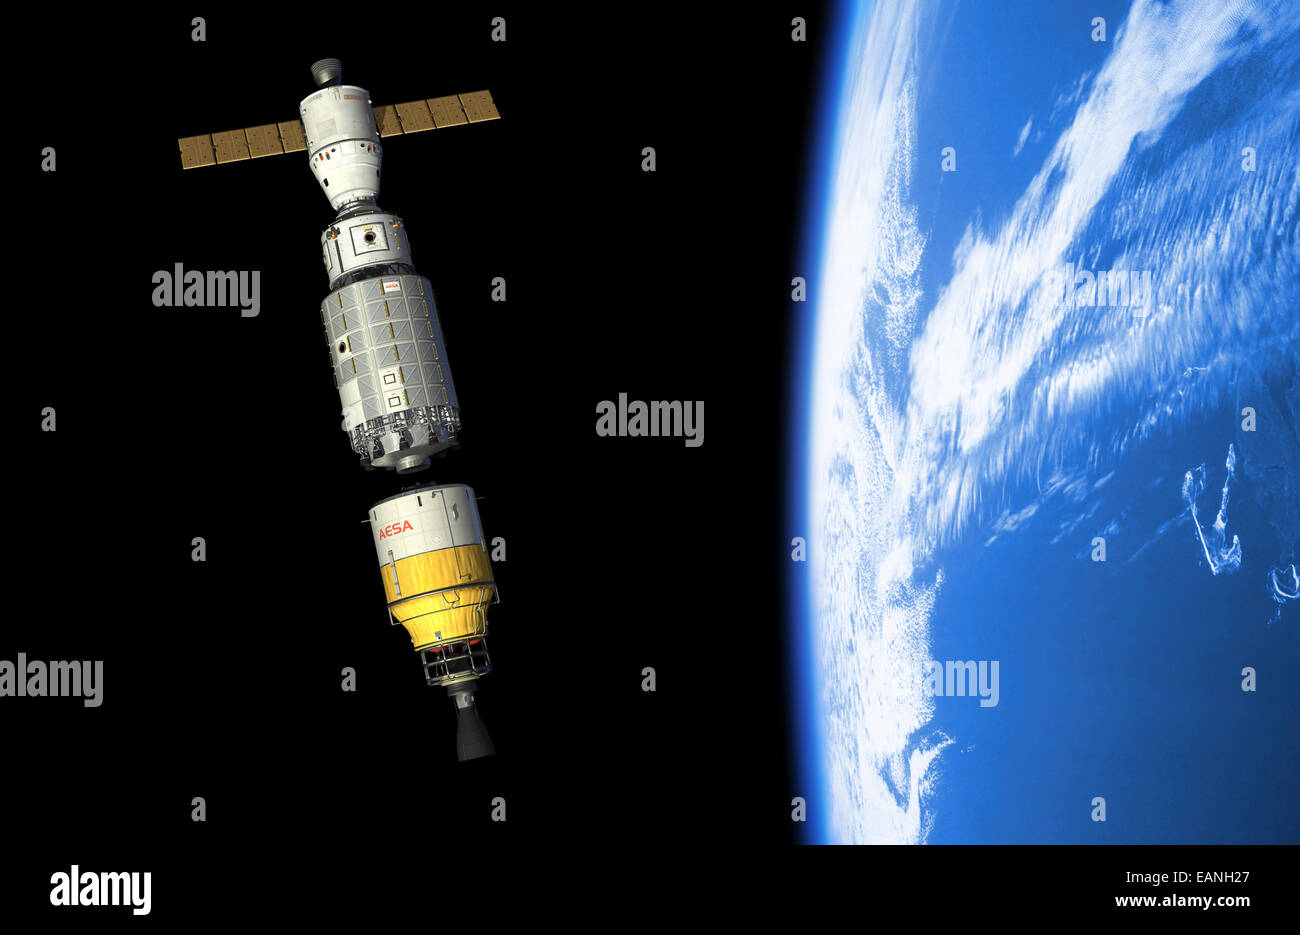 An orbital maintenance platform (OMP) docks an orbiting booster in low Earth orbit. Once connected the booster will loft the OMP Stock Photo